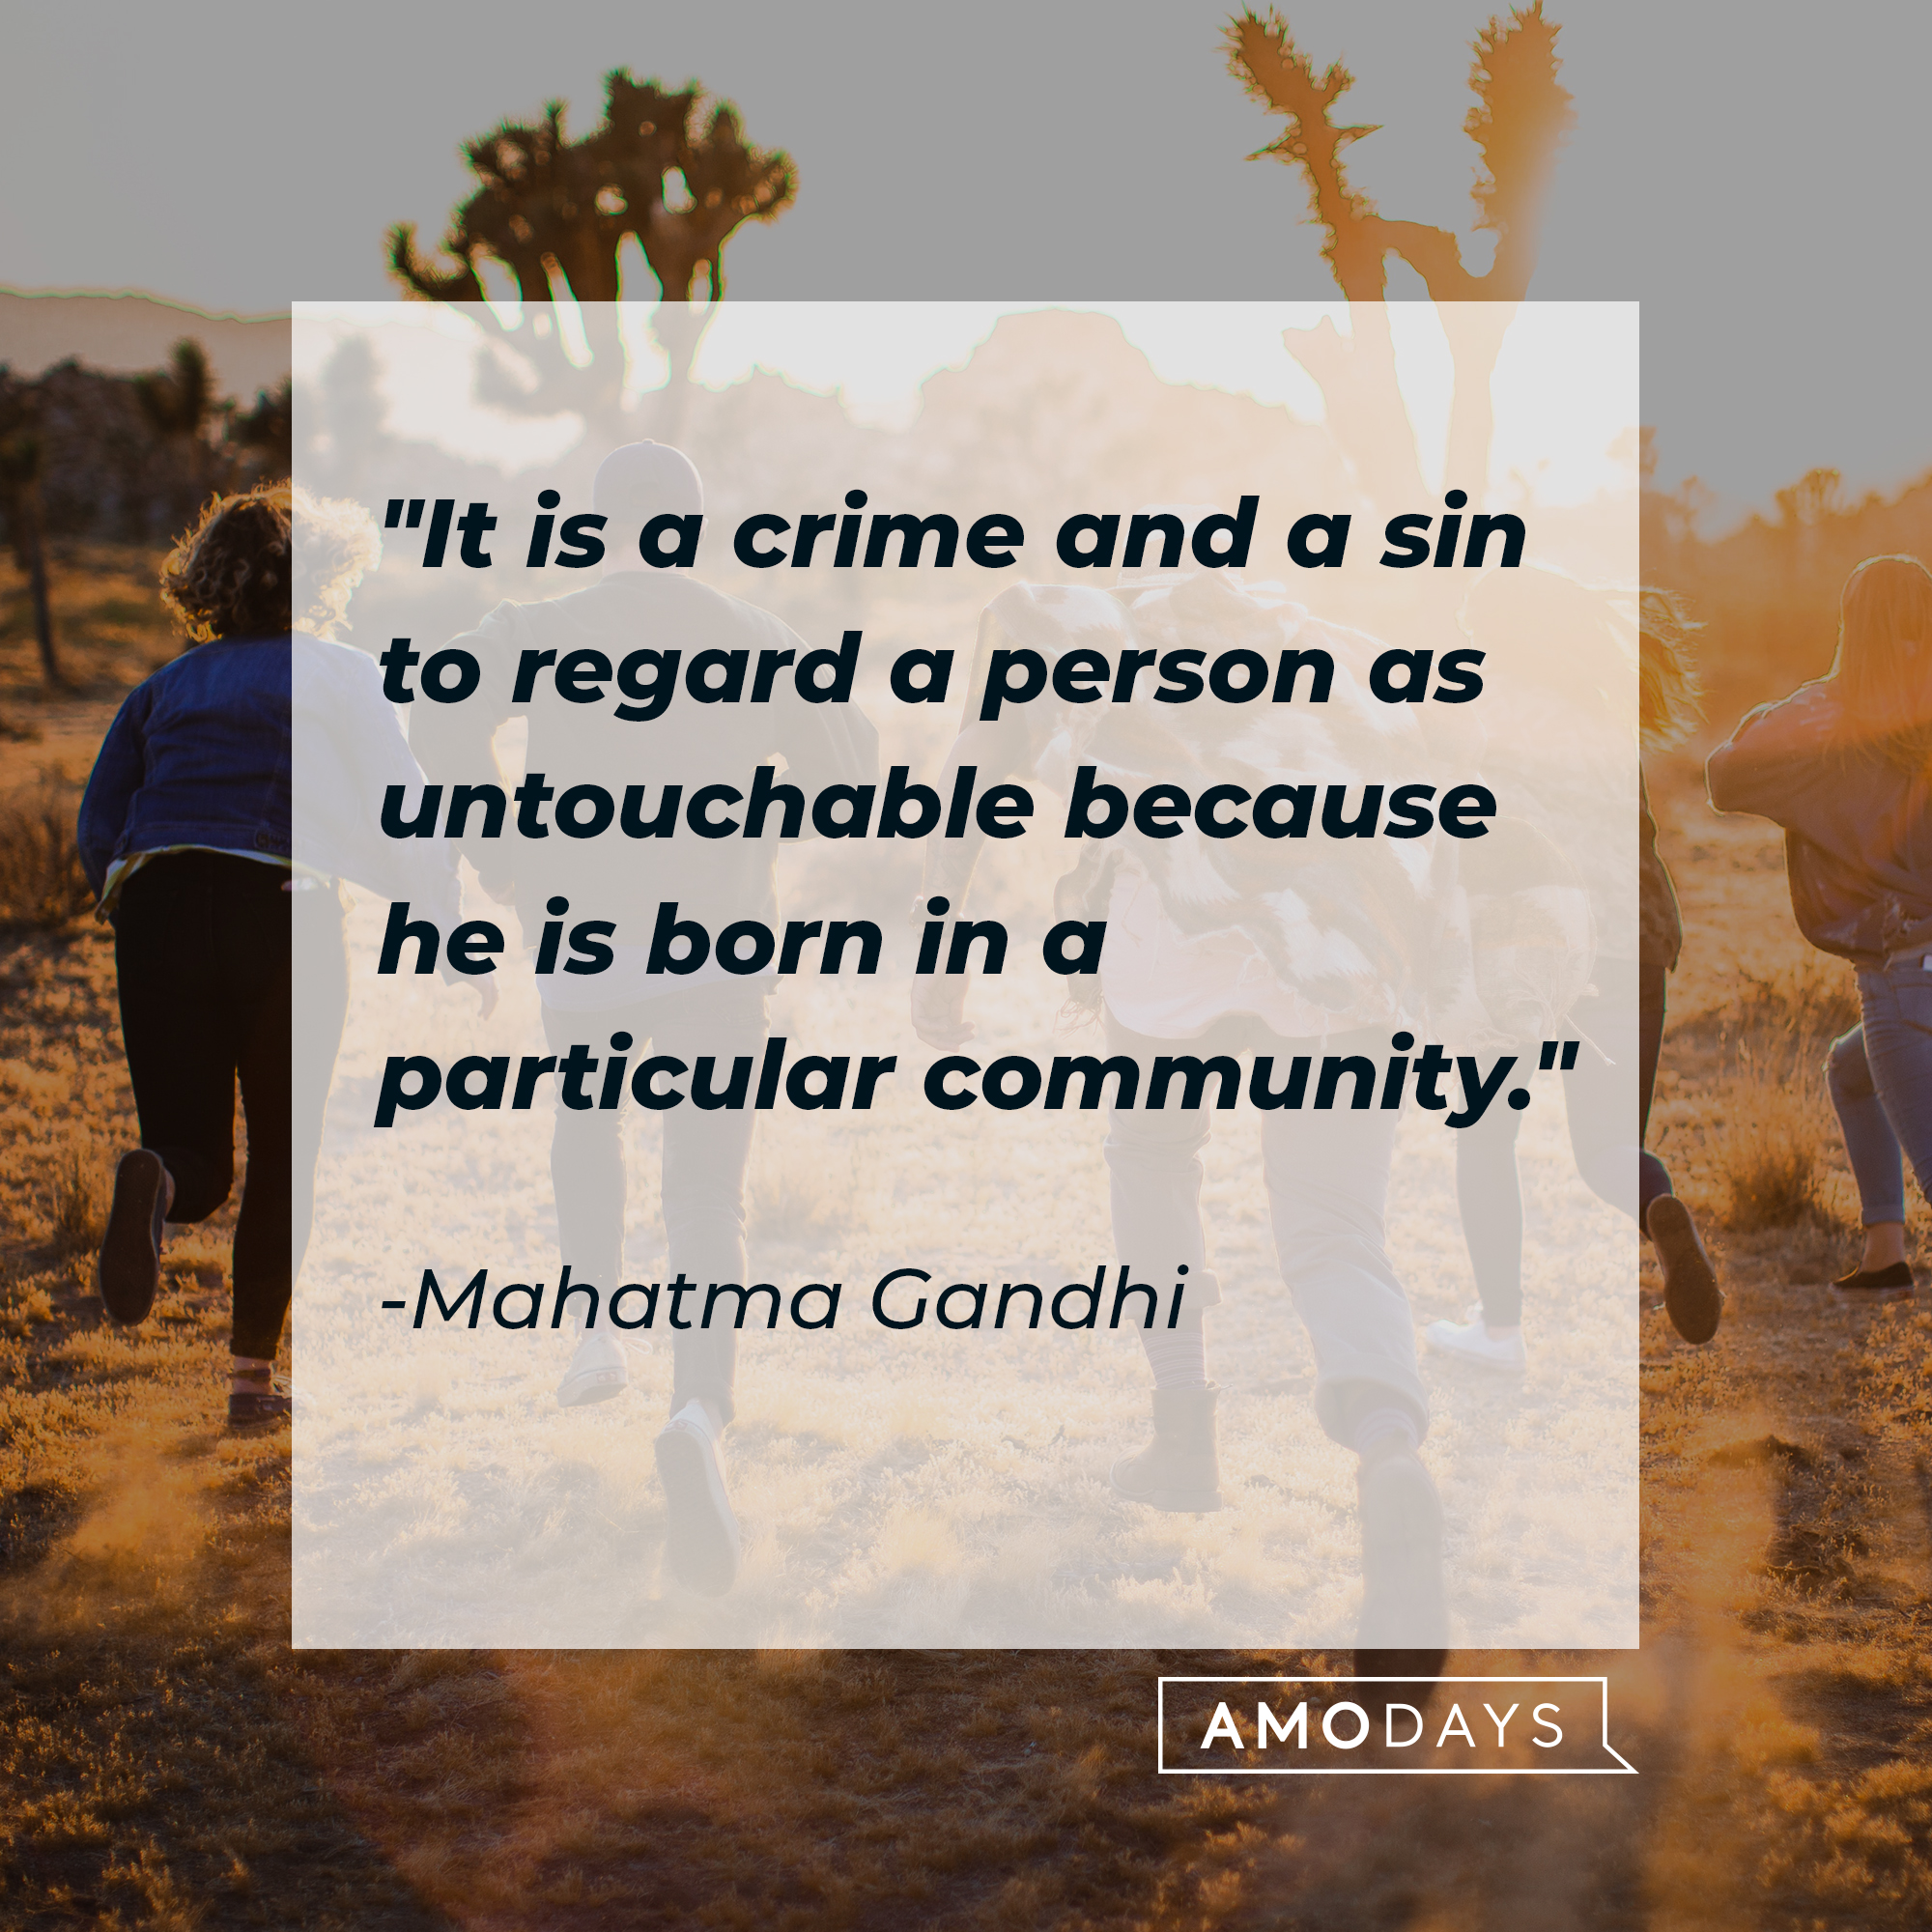 Mahatma Gandhi's quote: "It is a crime and a sin to regard a person as untouchable because he is born in a particular community." | Source: Unsplash